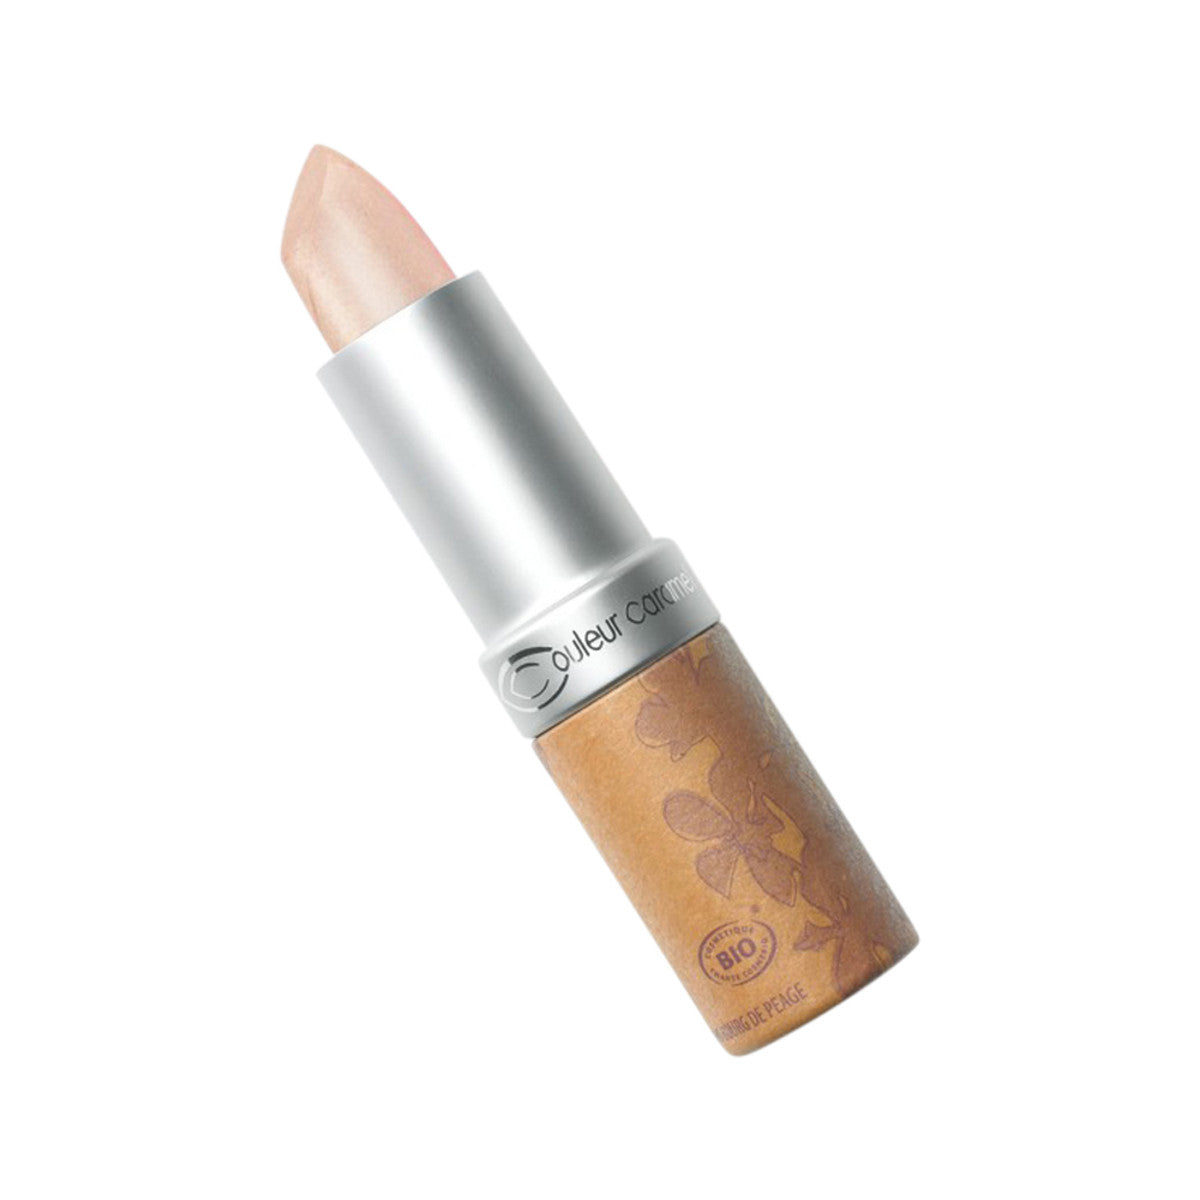 Couleur Caramel - Lipstick Pearly Light Pink (205)